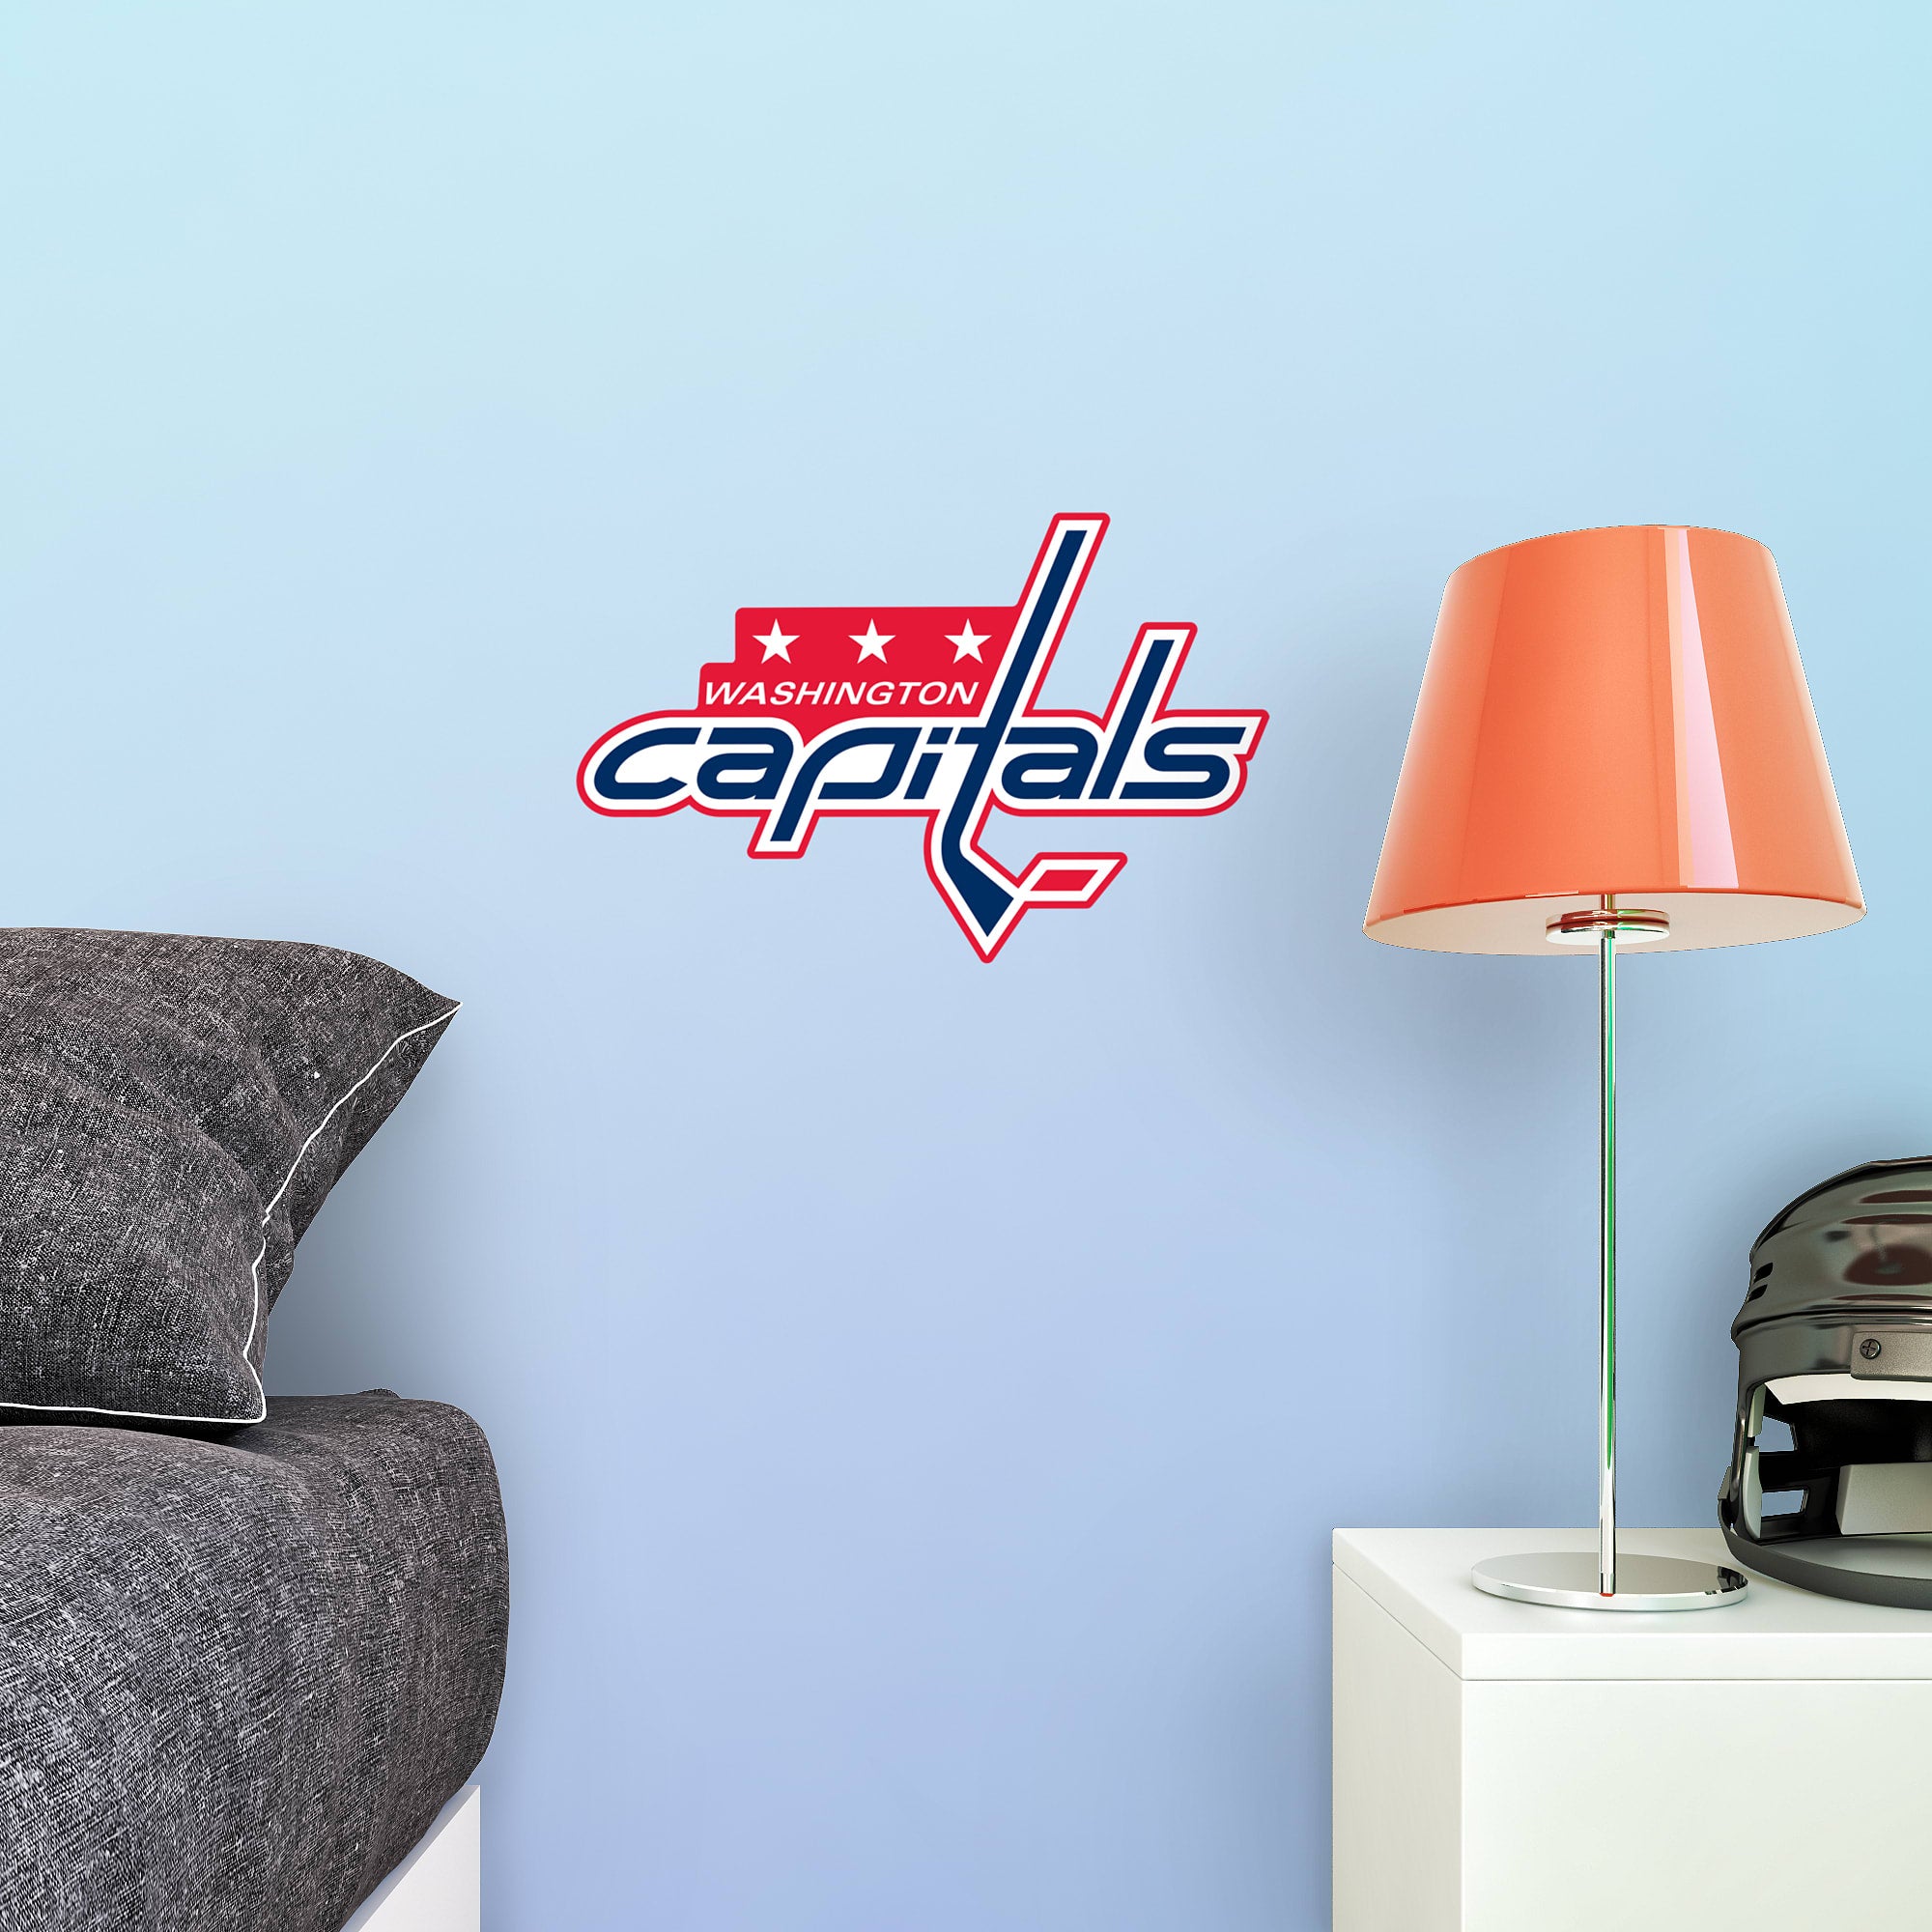 Washington Capitals: Logo - Officially Licensed NHL Removable Wall Decal Large by Fathead | Vinyl